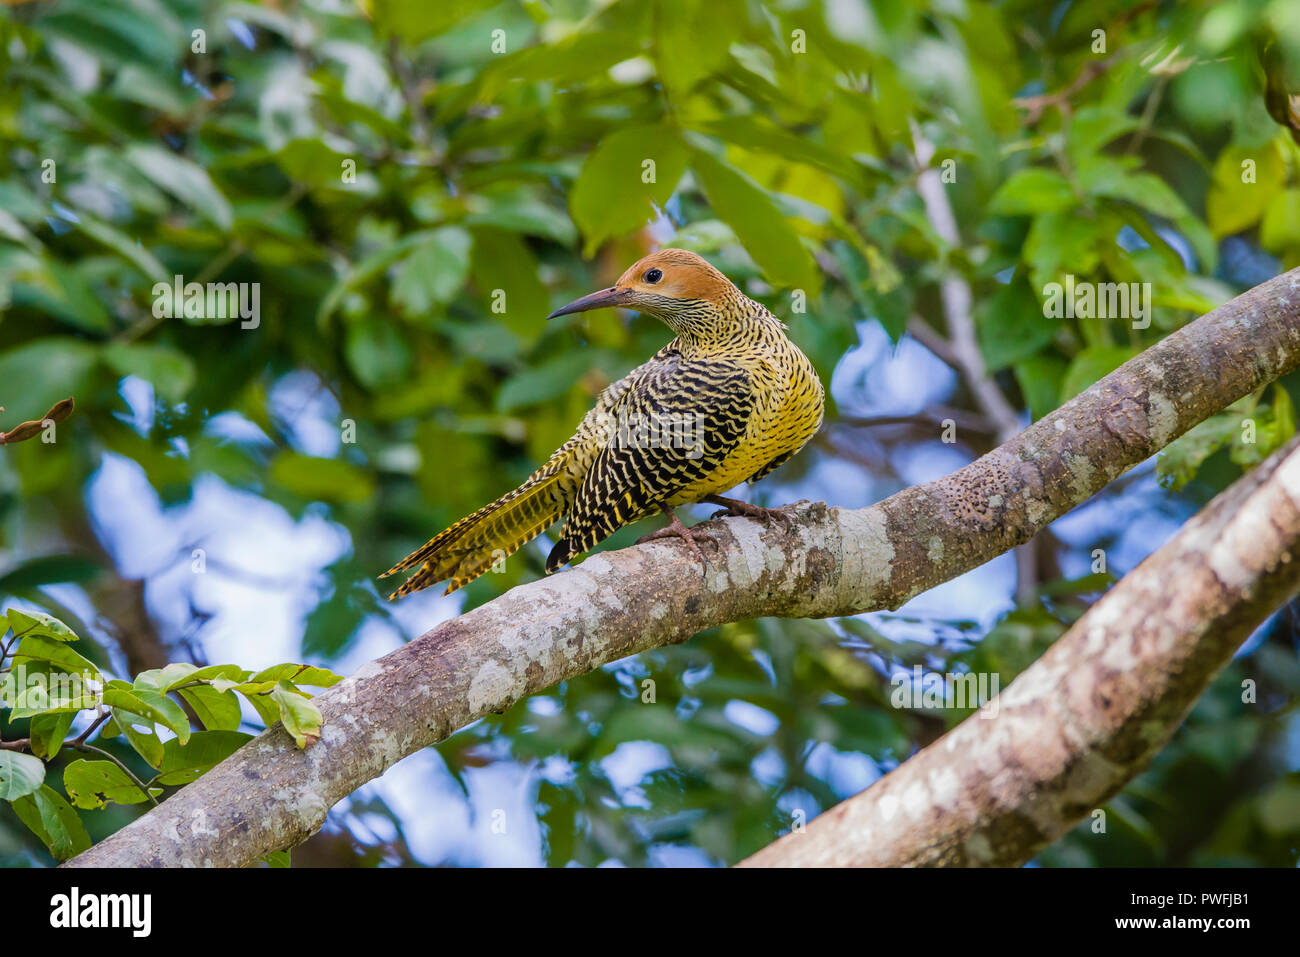 This female Fernandina's Flicker (Colaptes fernandinae) is one of the most rare woodpeckers in the world, second only to the Ivory-billed Woodpecker.  Stock Photo